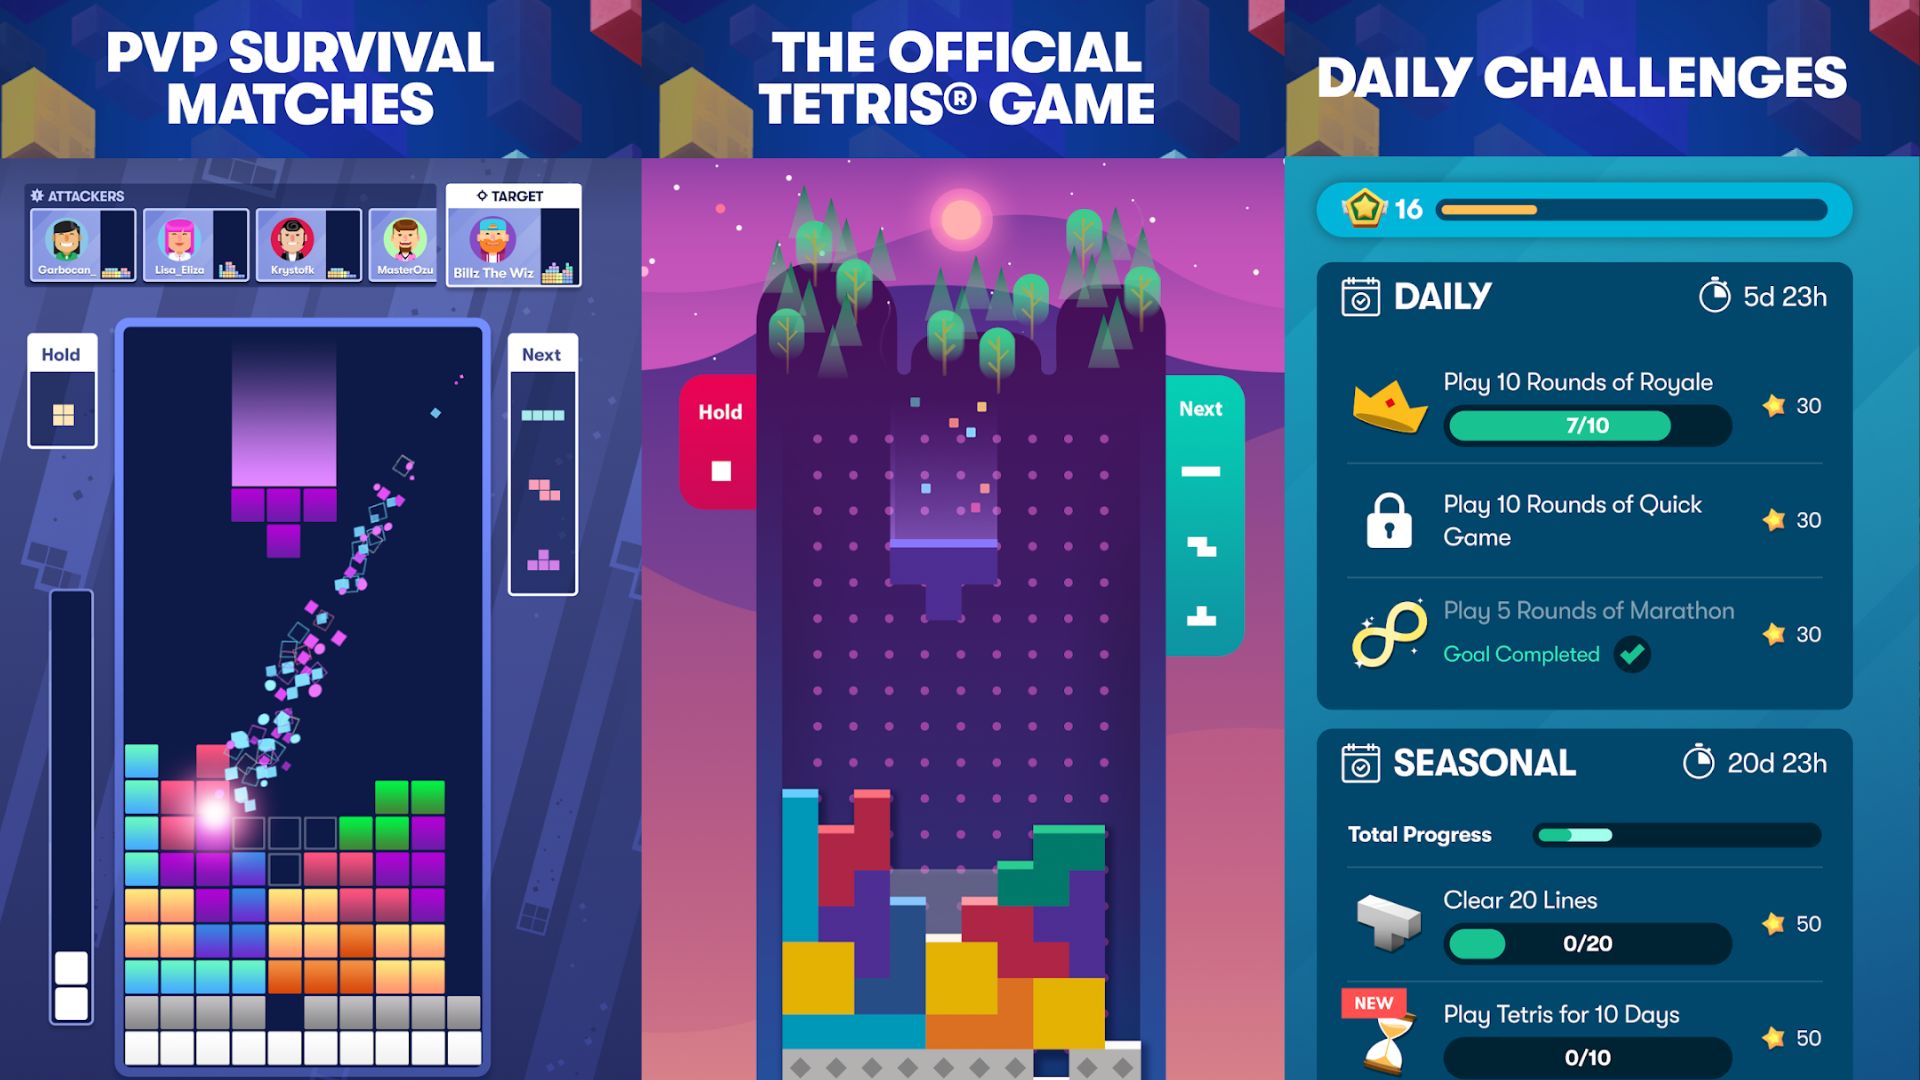 Modernist building blocks feature in Tetris-inspired mobile game